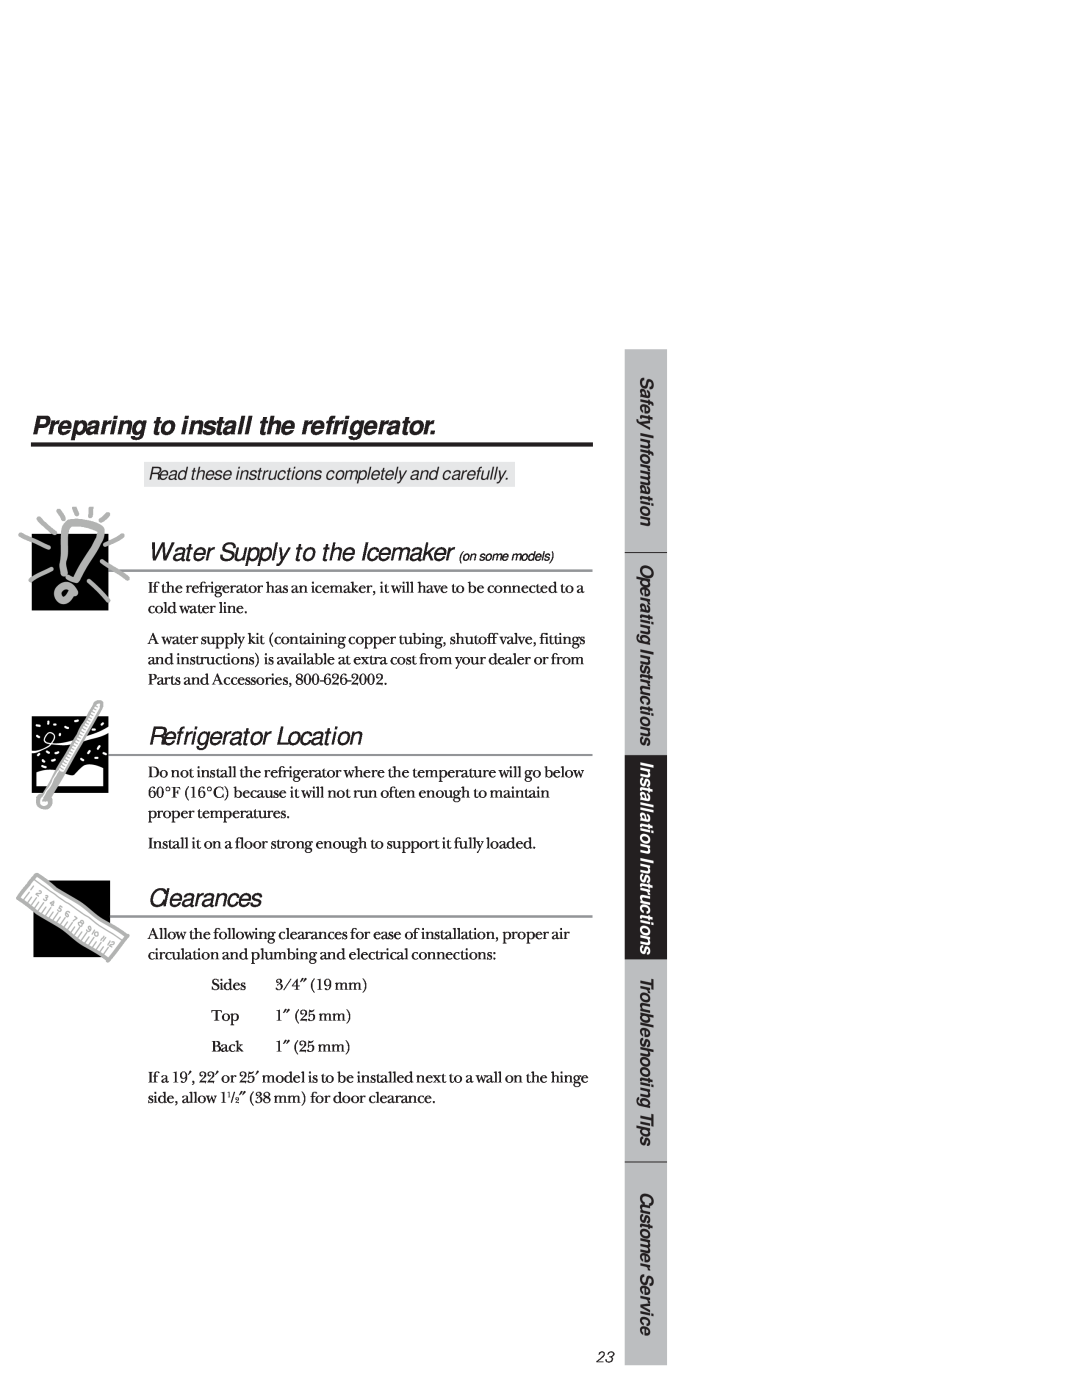 GE 1825 owner manual Preparing to install the refrigerator, Refrigerator Location, Clearances 